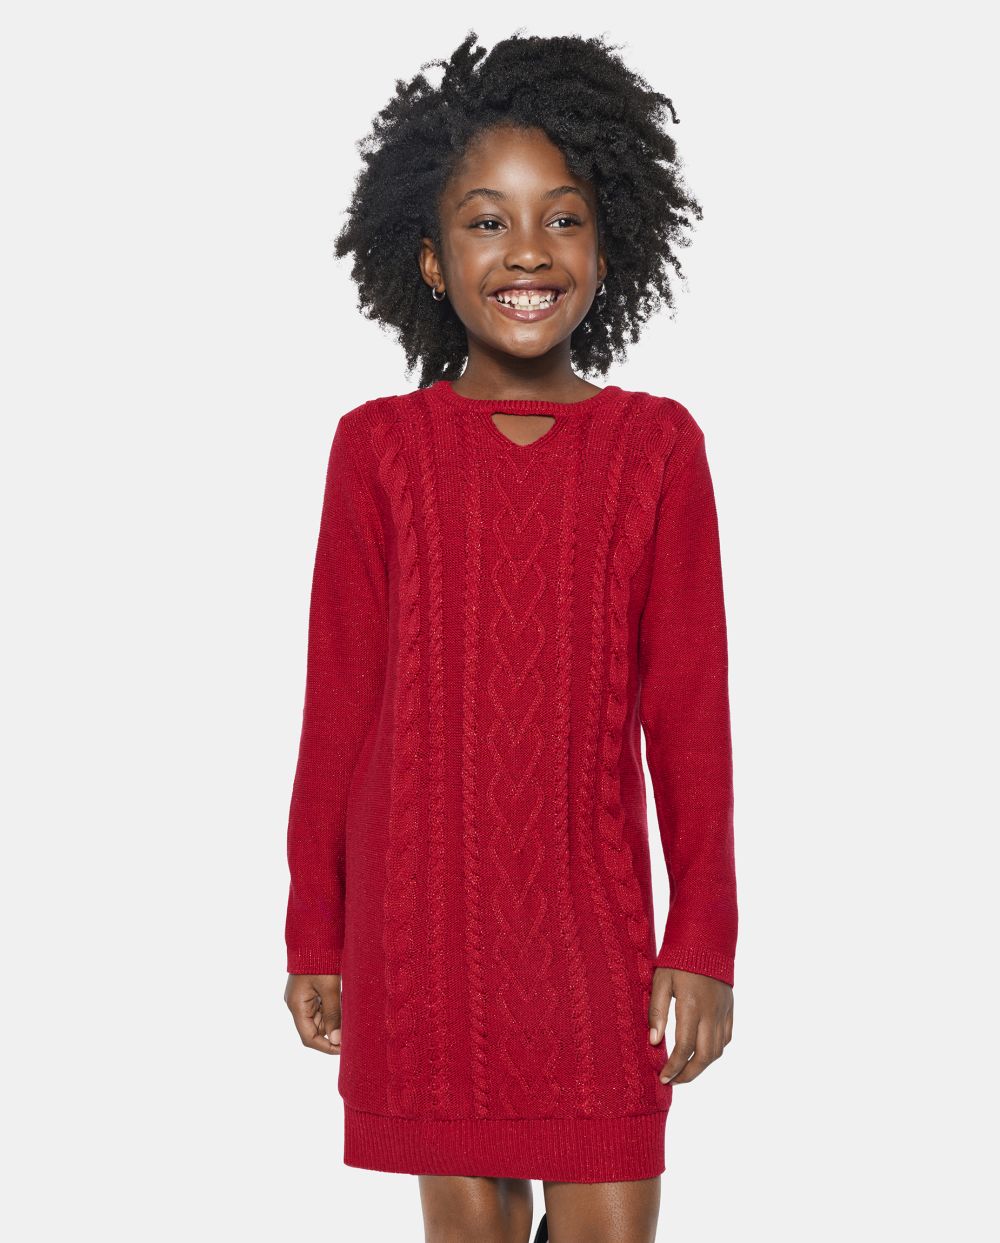 Girls Sweater Long Sleeves Above the Knee Cutout Crew Neck Dress